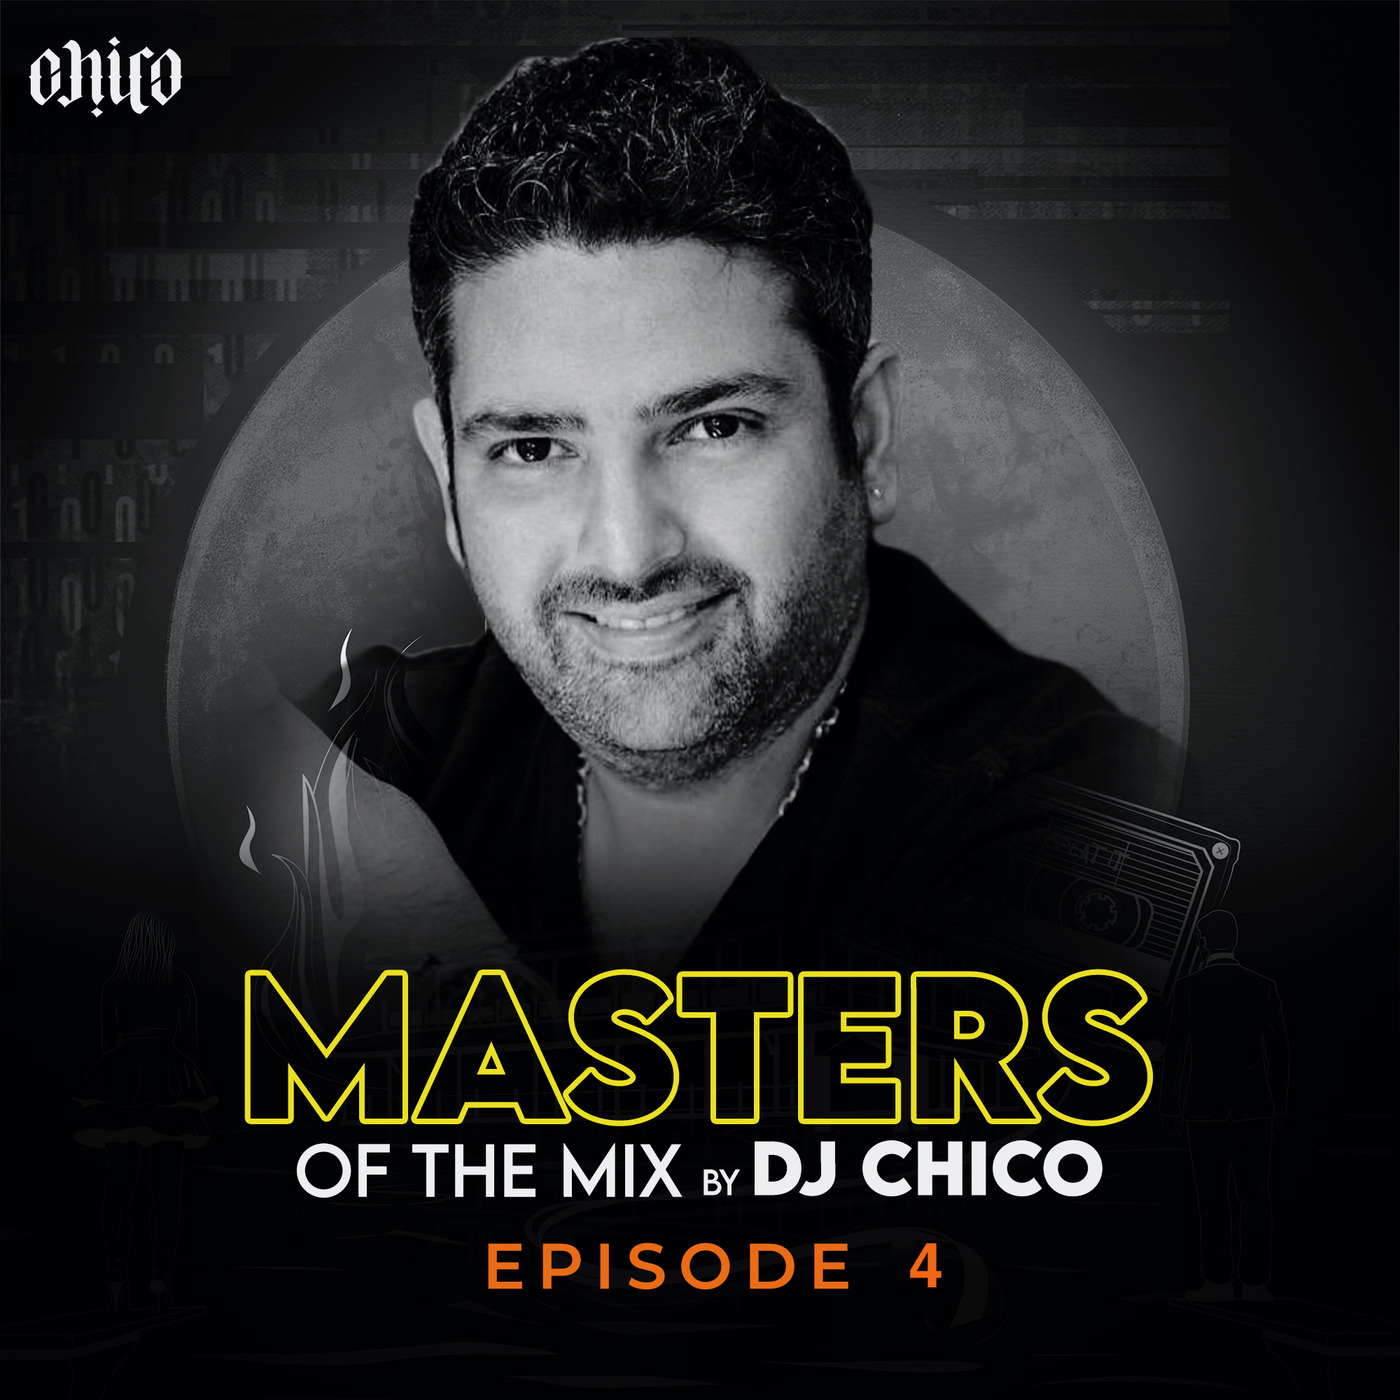 Masters of the Mix by Dj Chico